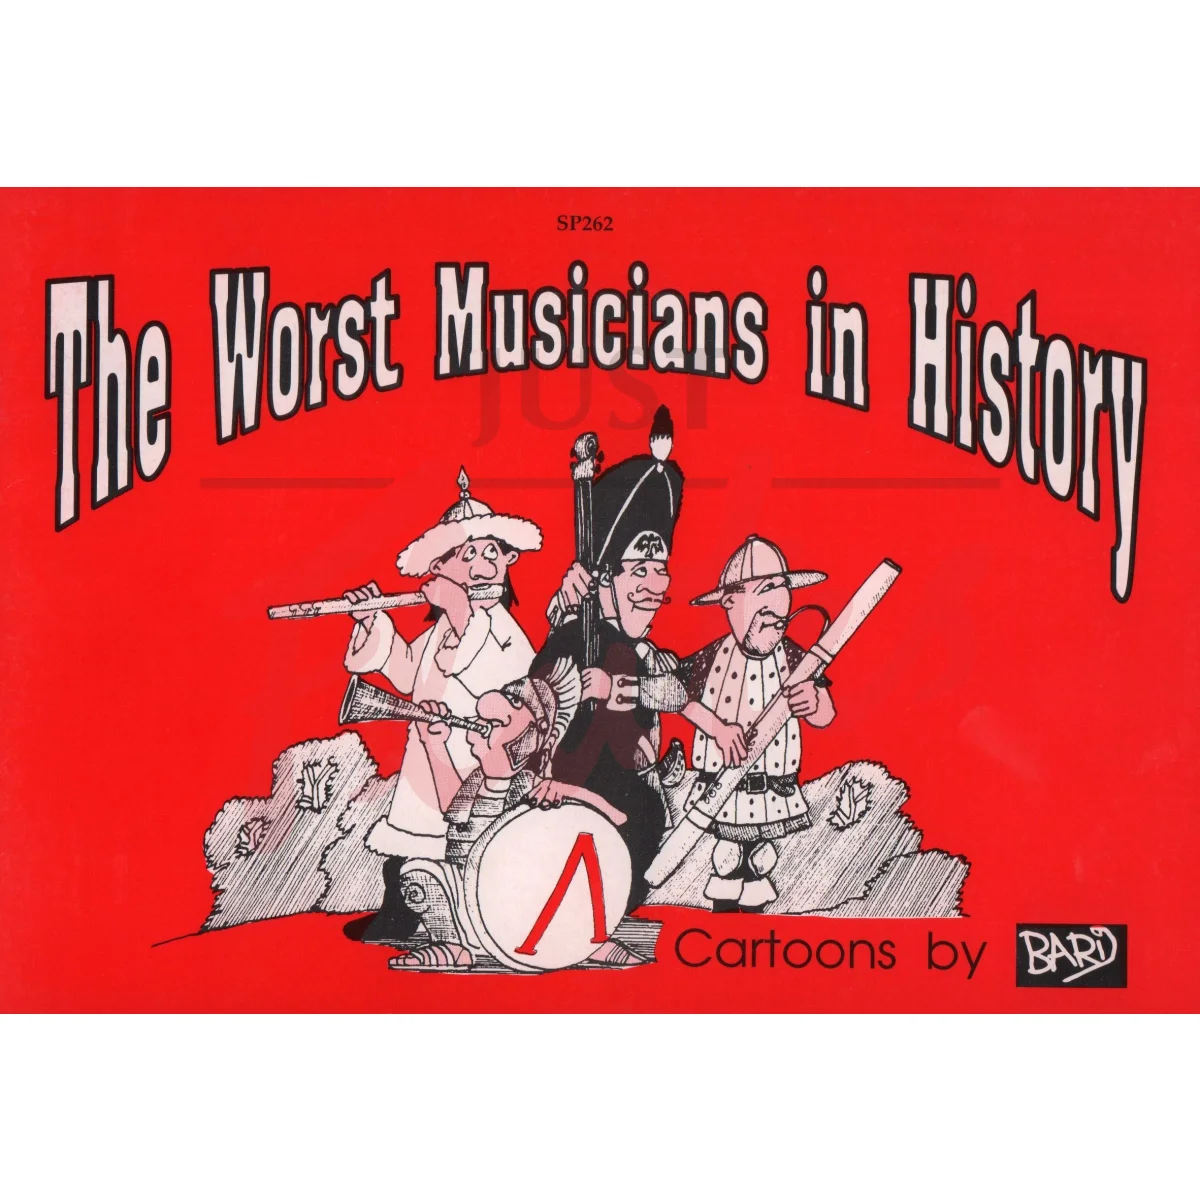 The Worst Musicians in History